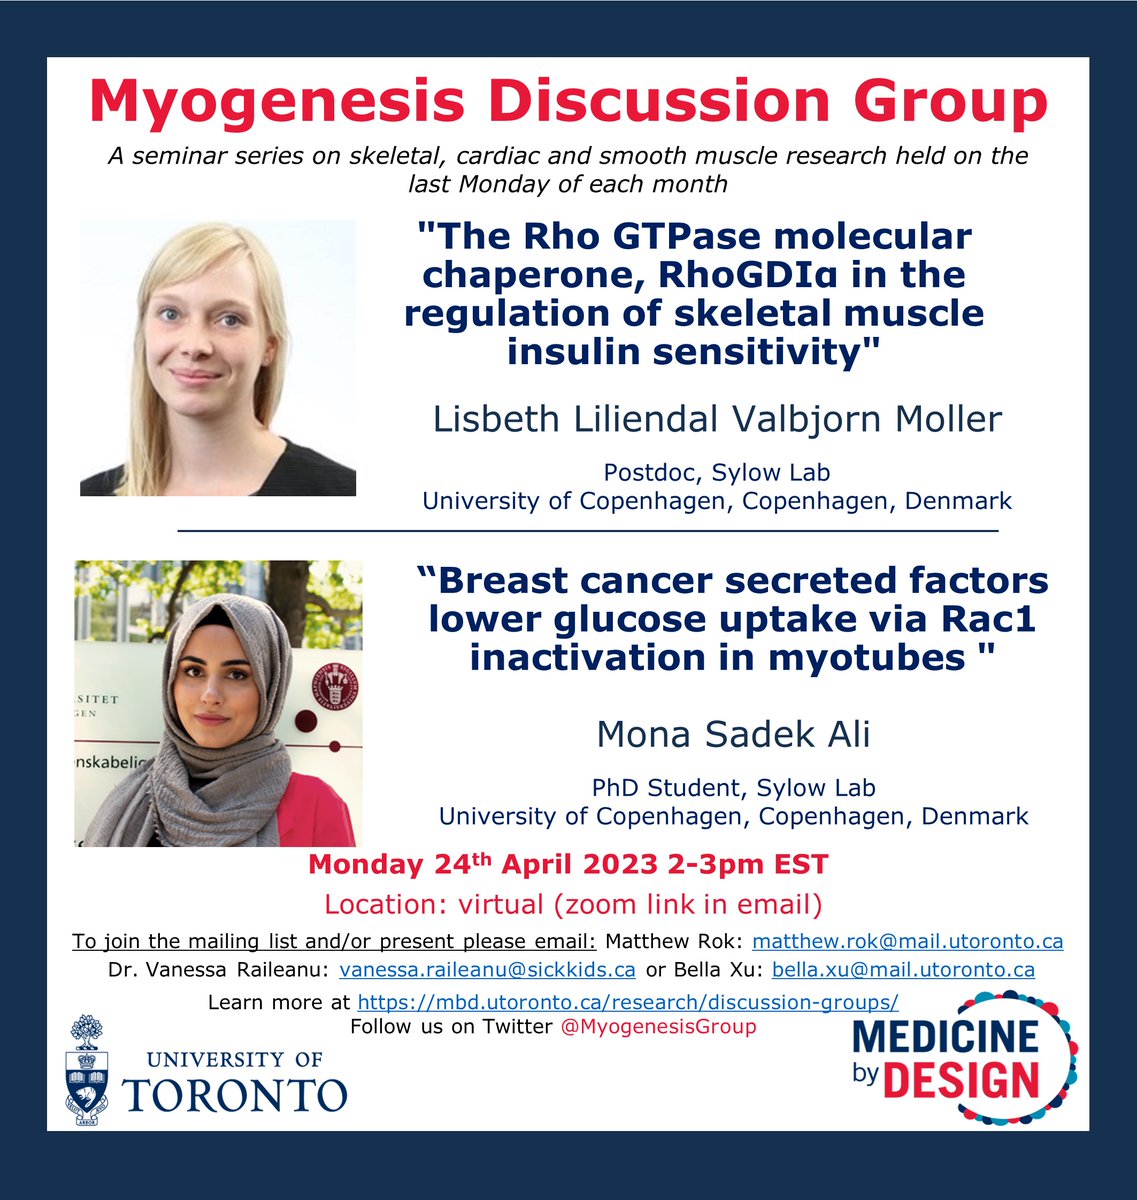 Please join us for the next Myogenesis Seminar Series on Monday April 24 from 2-3pm EST! Dr. Lisbeth Møller and Mona Ali from the University of Copenhagen in Copenhagen, Denmark will be presenting their research. Please see below 👇